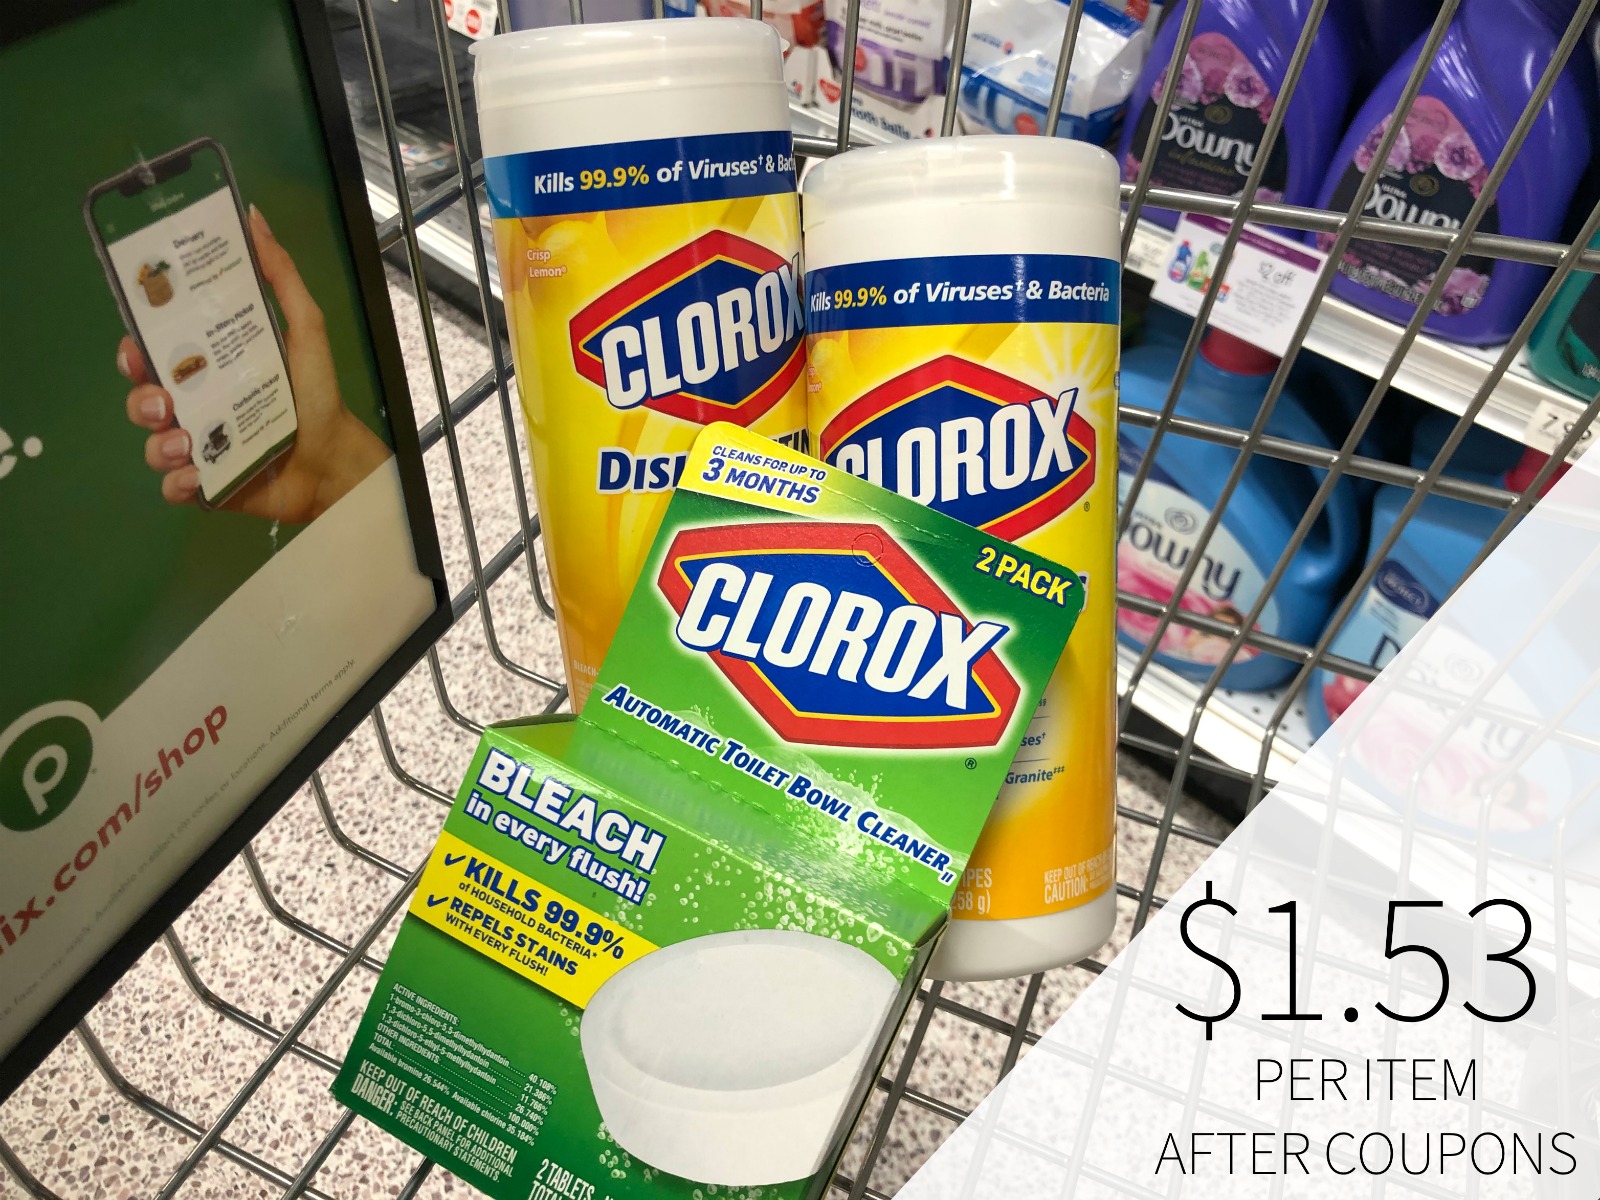 Clorox Disinfecting Wipes Just $2.79 + FREE Clorox Automatic Toilet Bowl Cleaner At Publix on I Heart Publix 2